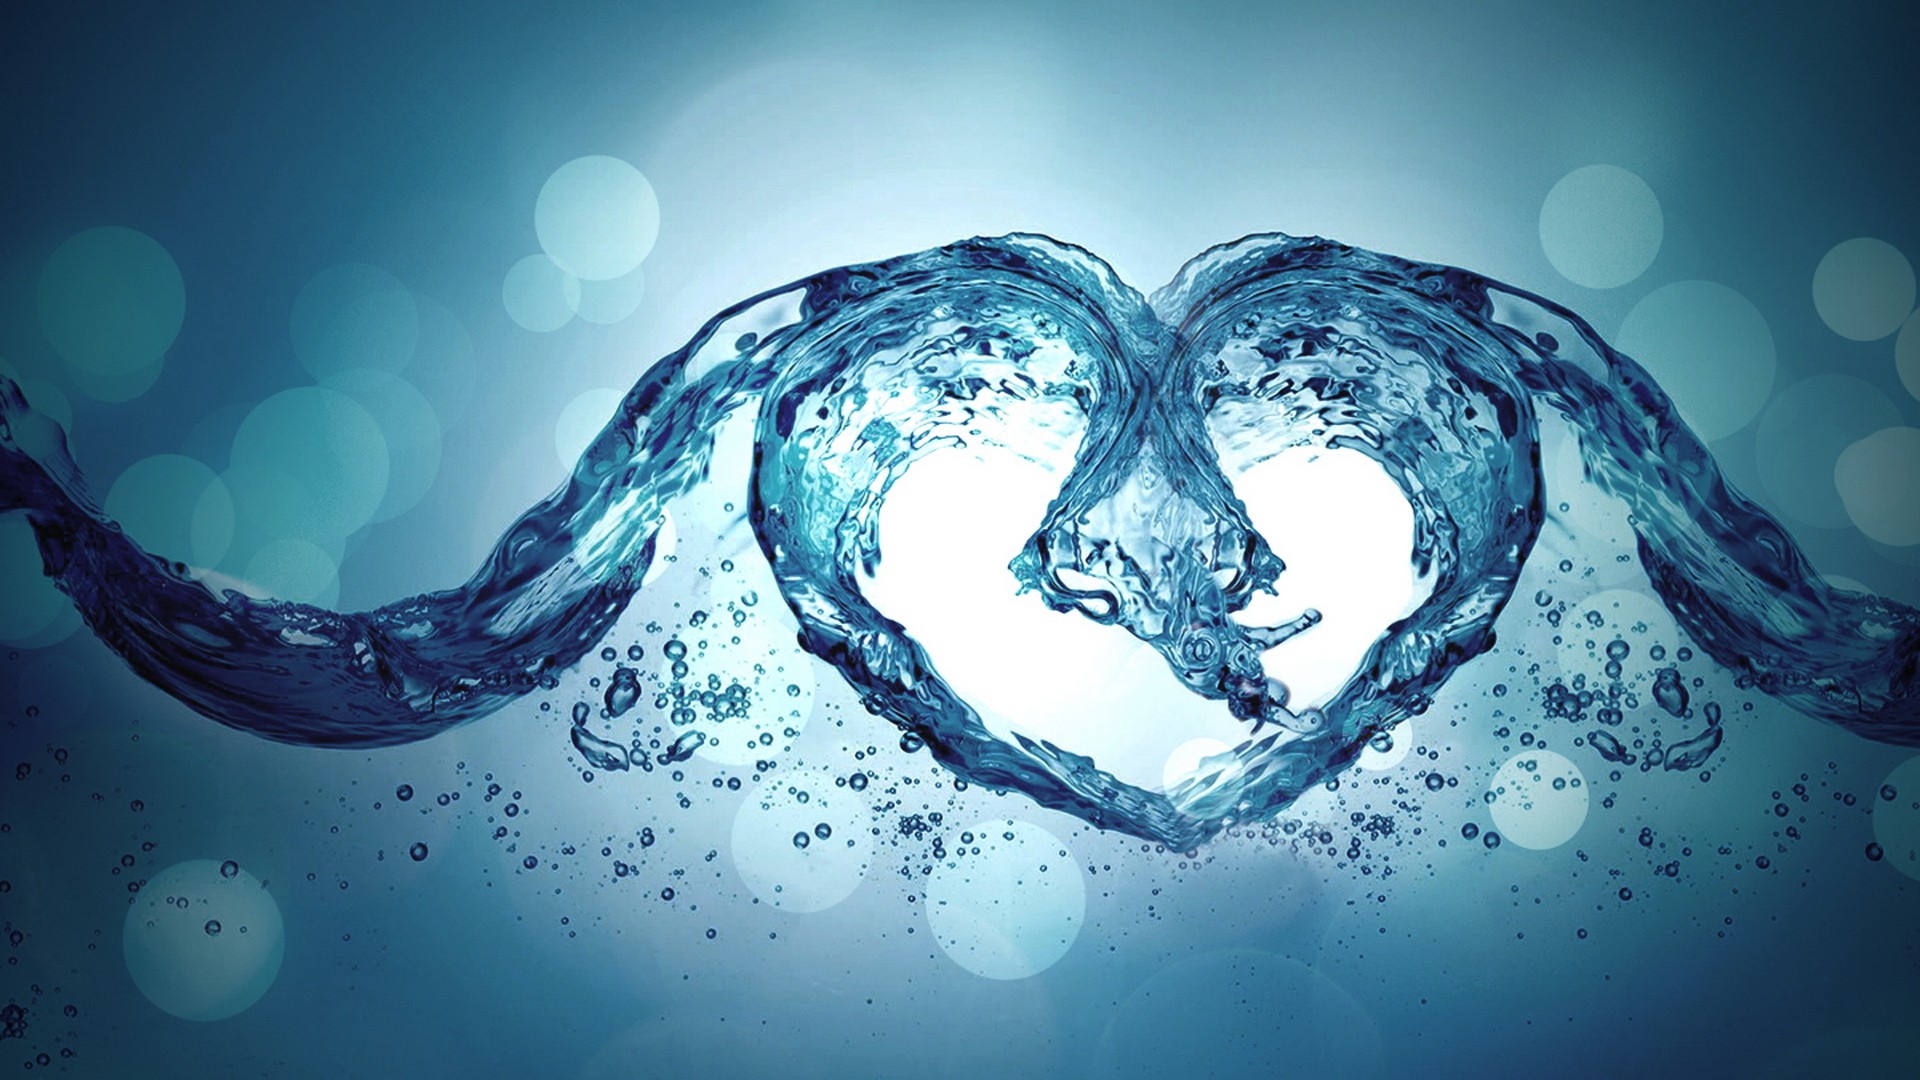 Water Abstract Wallpaper 1920x1080 Water Abstract Love